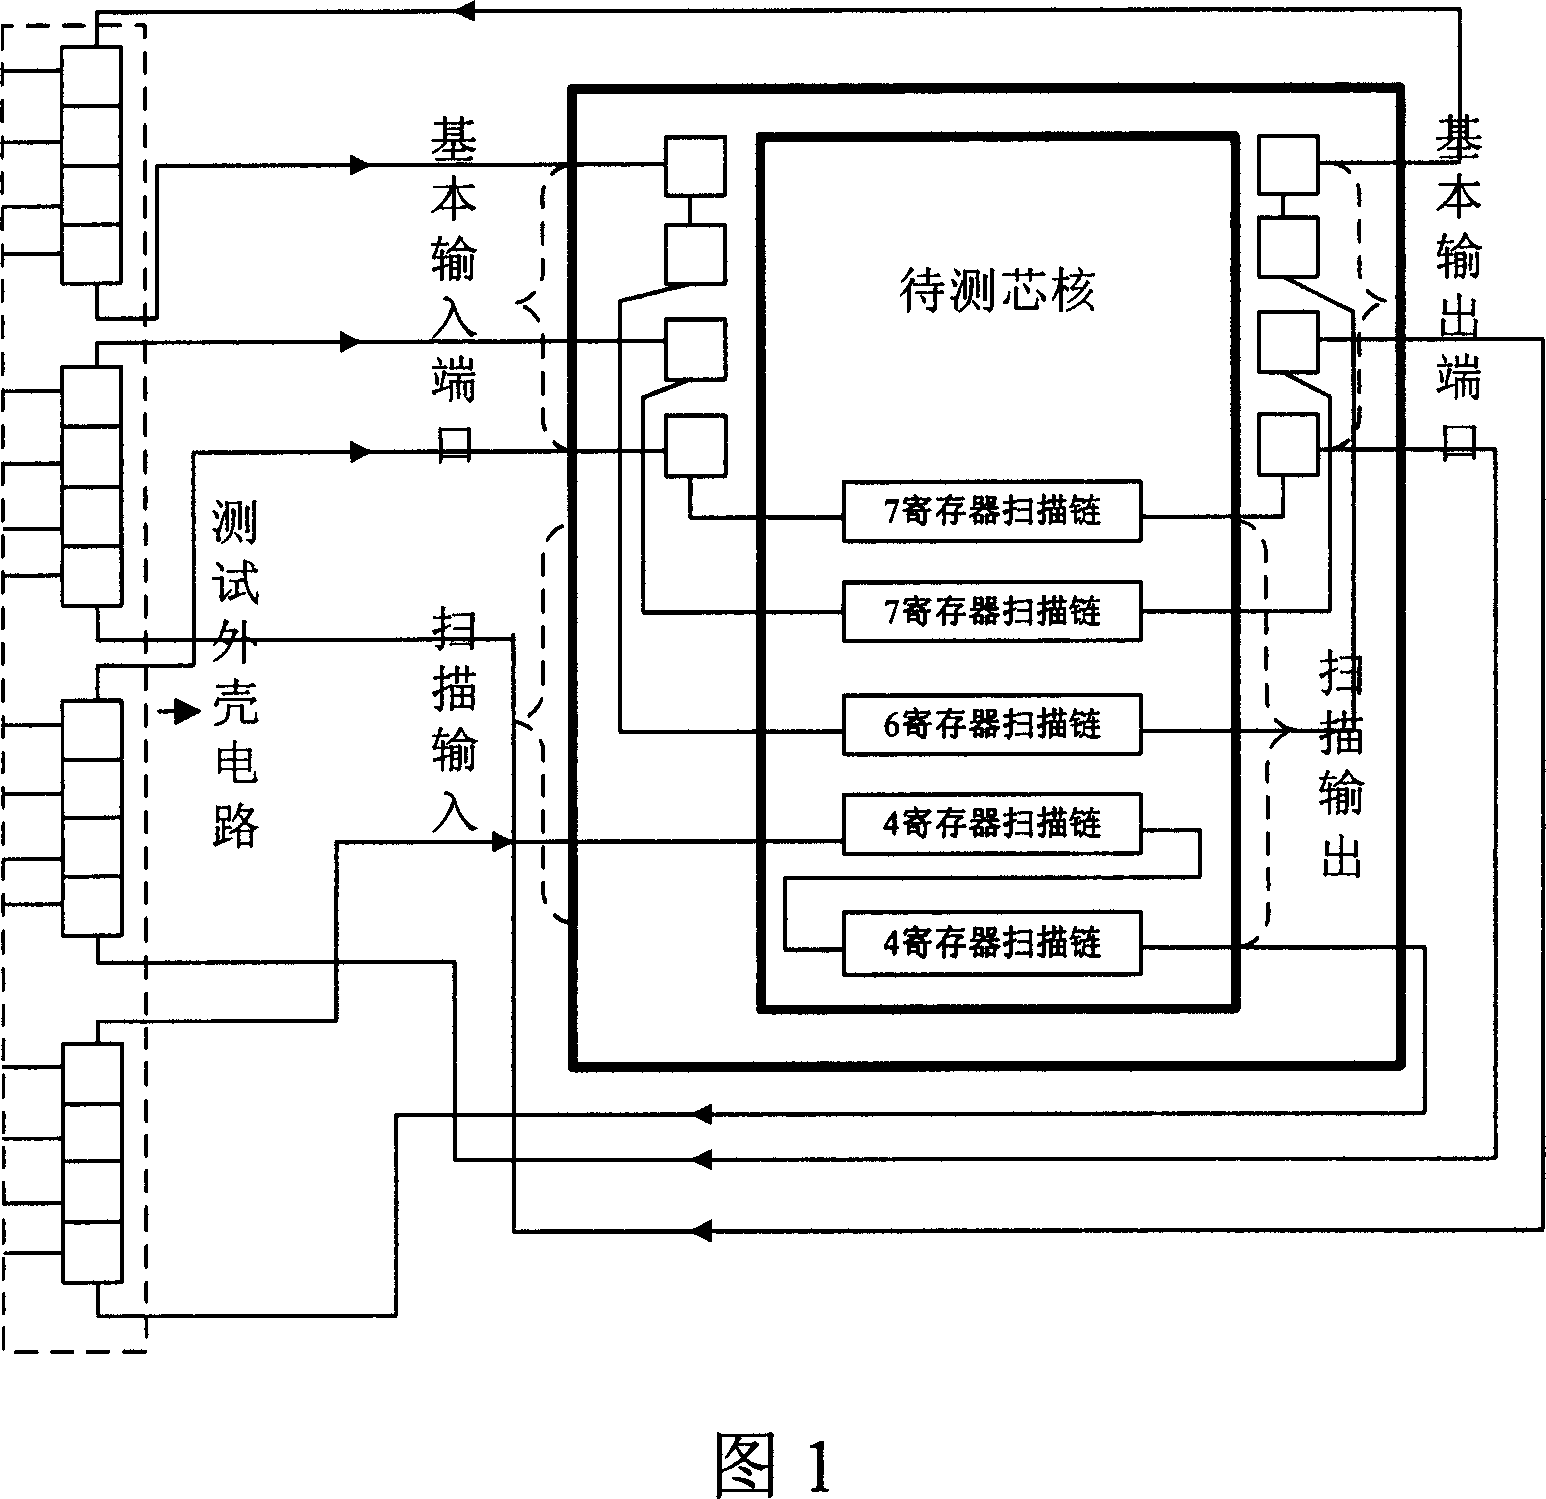 A test shell circuit and its design method